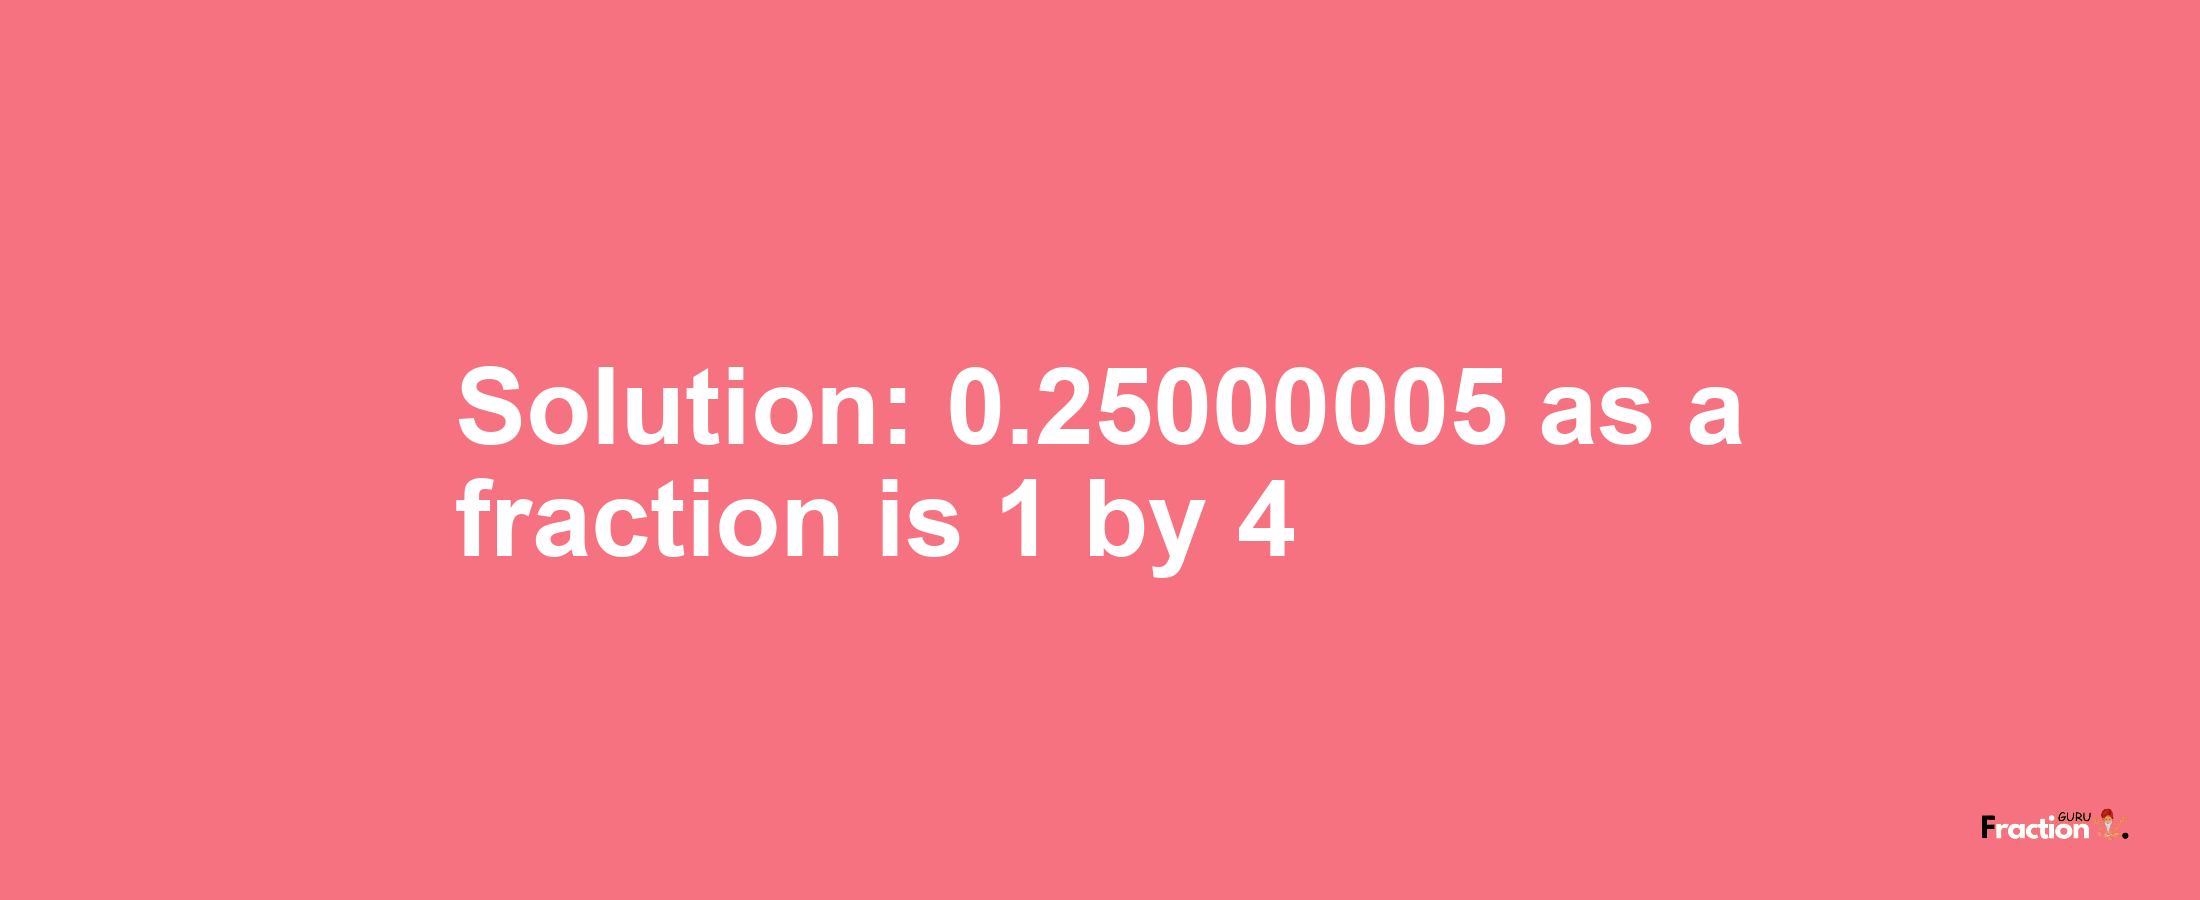 Solution:0.25000005 as a fraction is 1/4